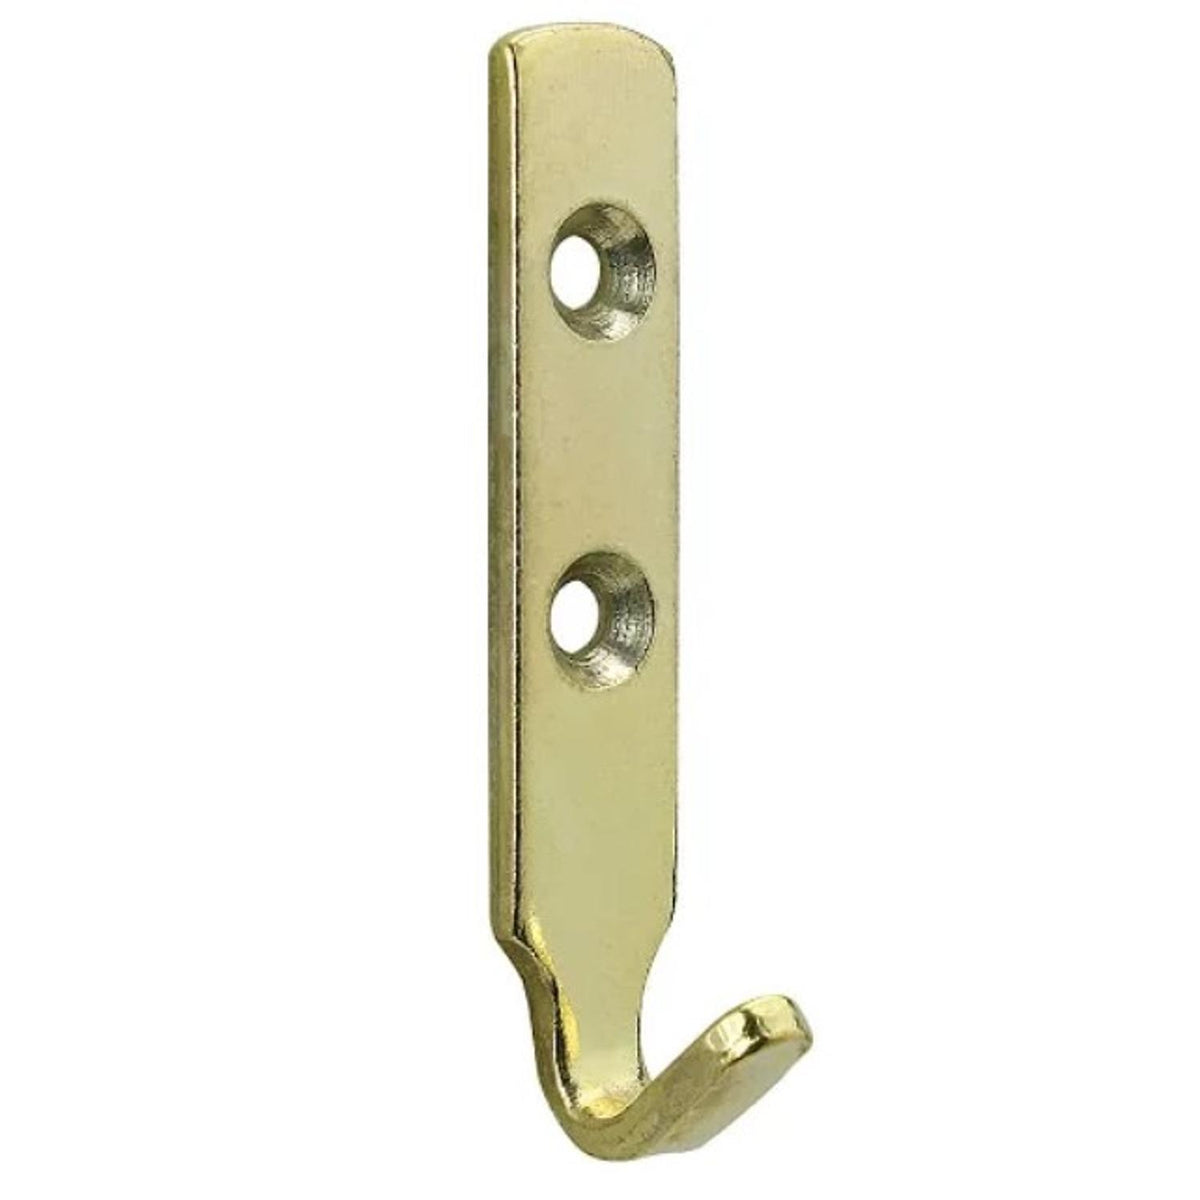 254487 – No 2 Picture Hook Brass Single – CORRY'S